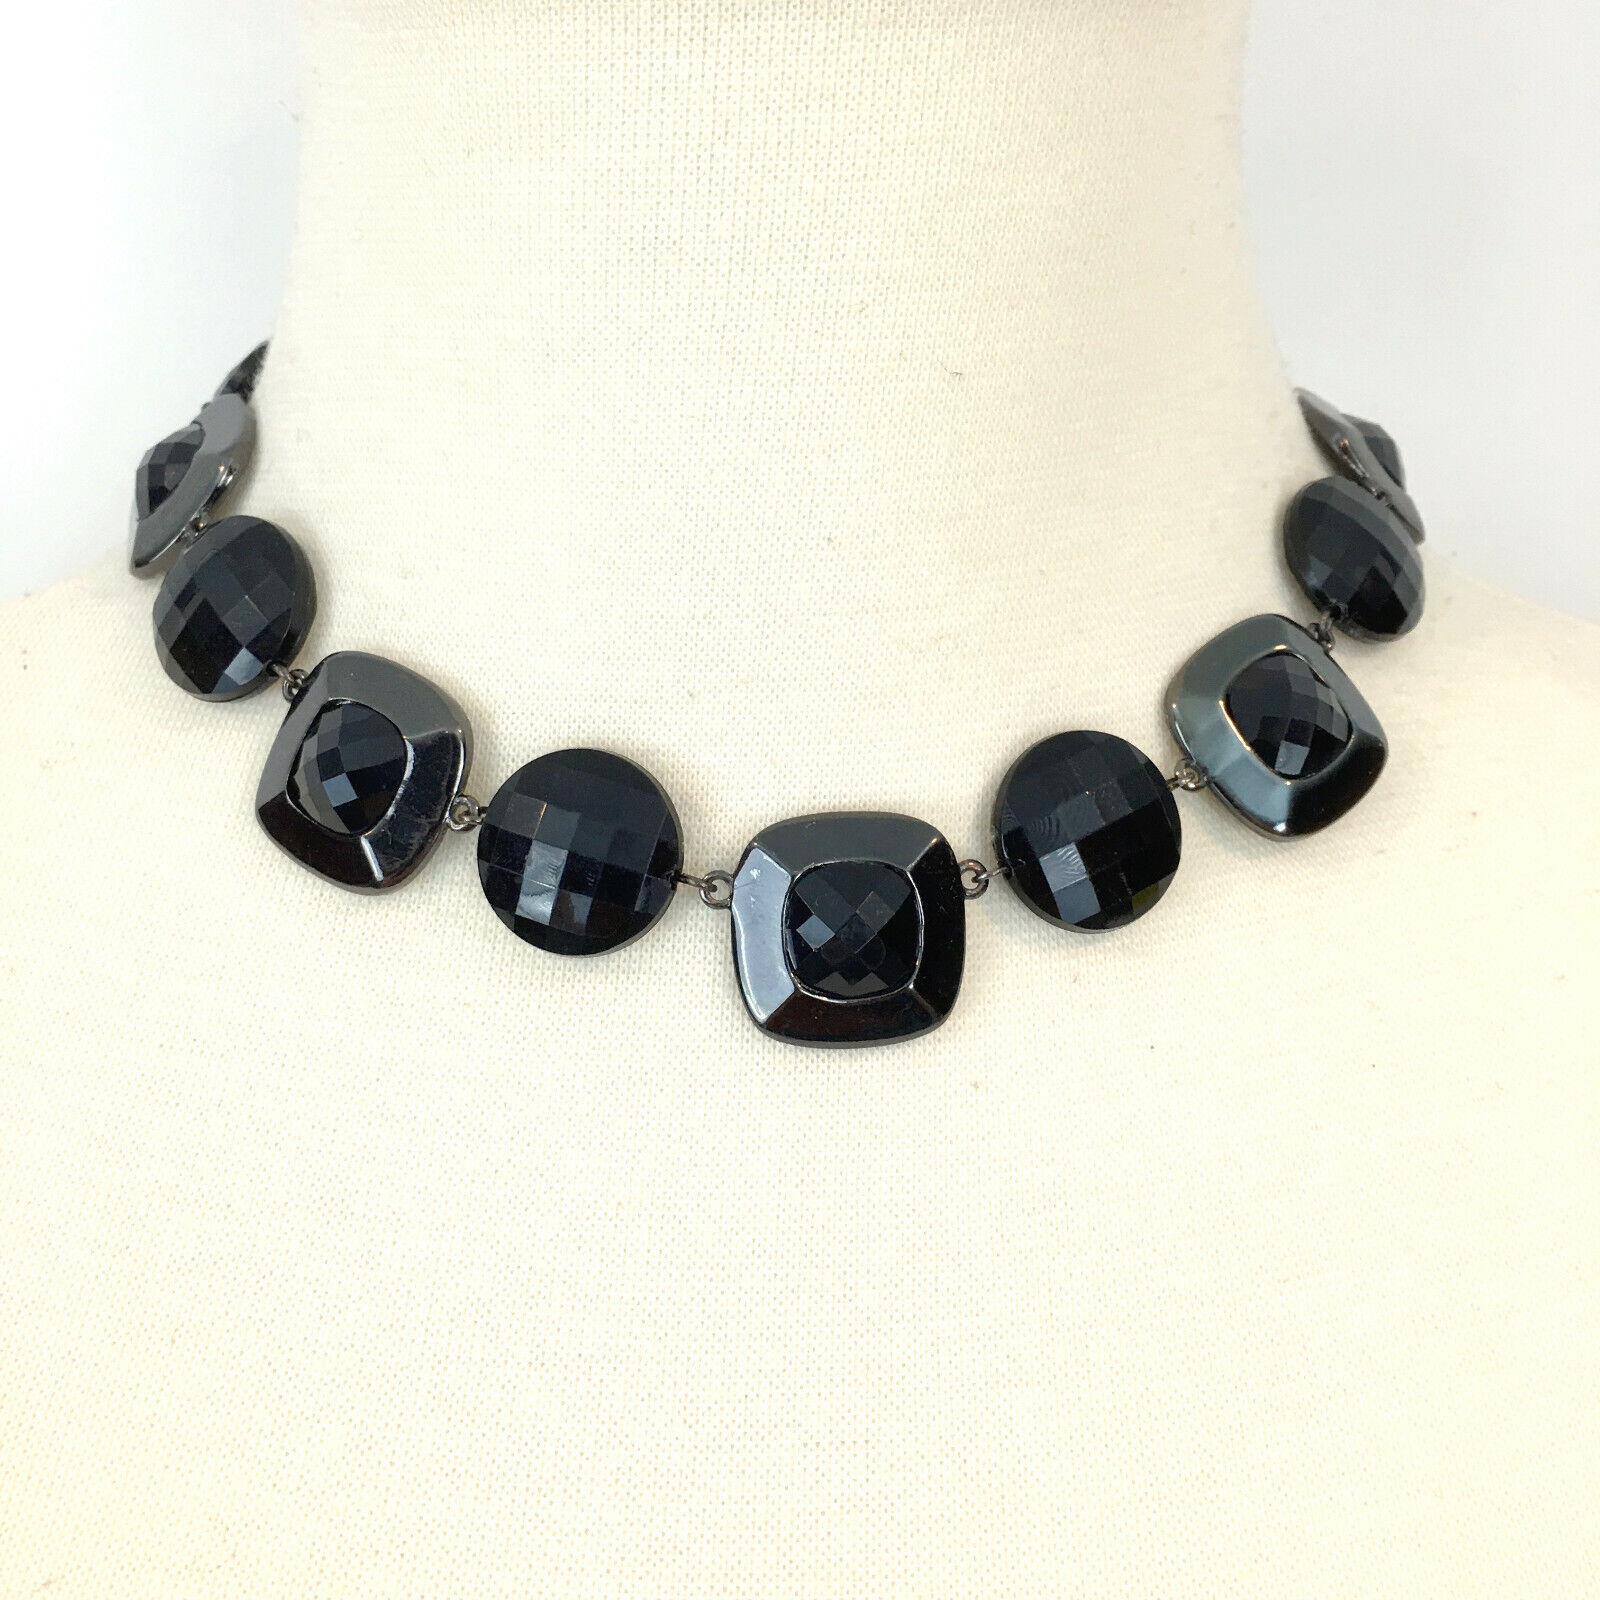 CROWN TRIFARI black faceted bead necklace - round square flat station choker 16" - $15.00